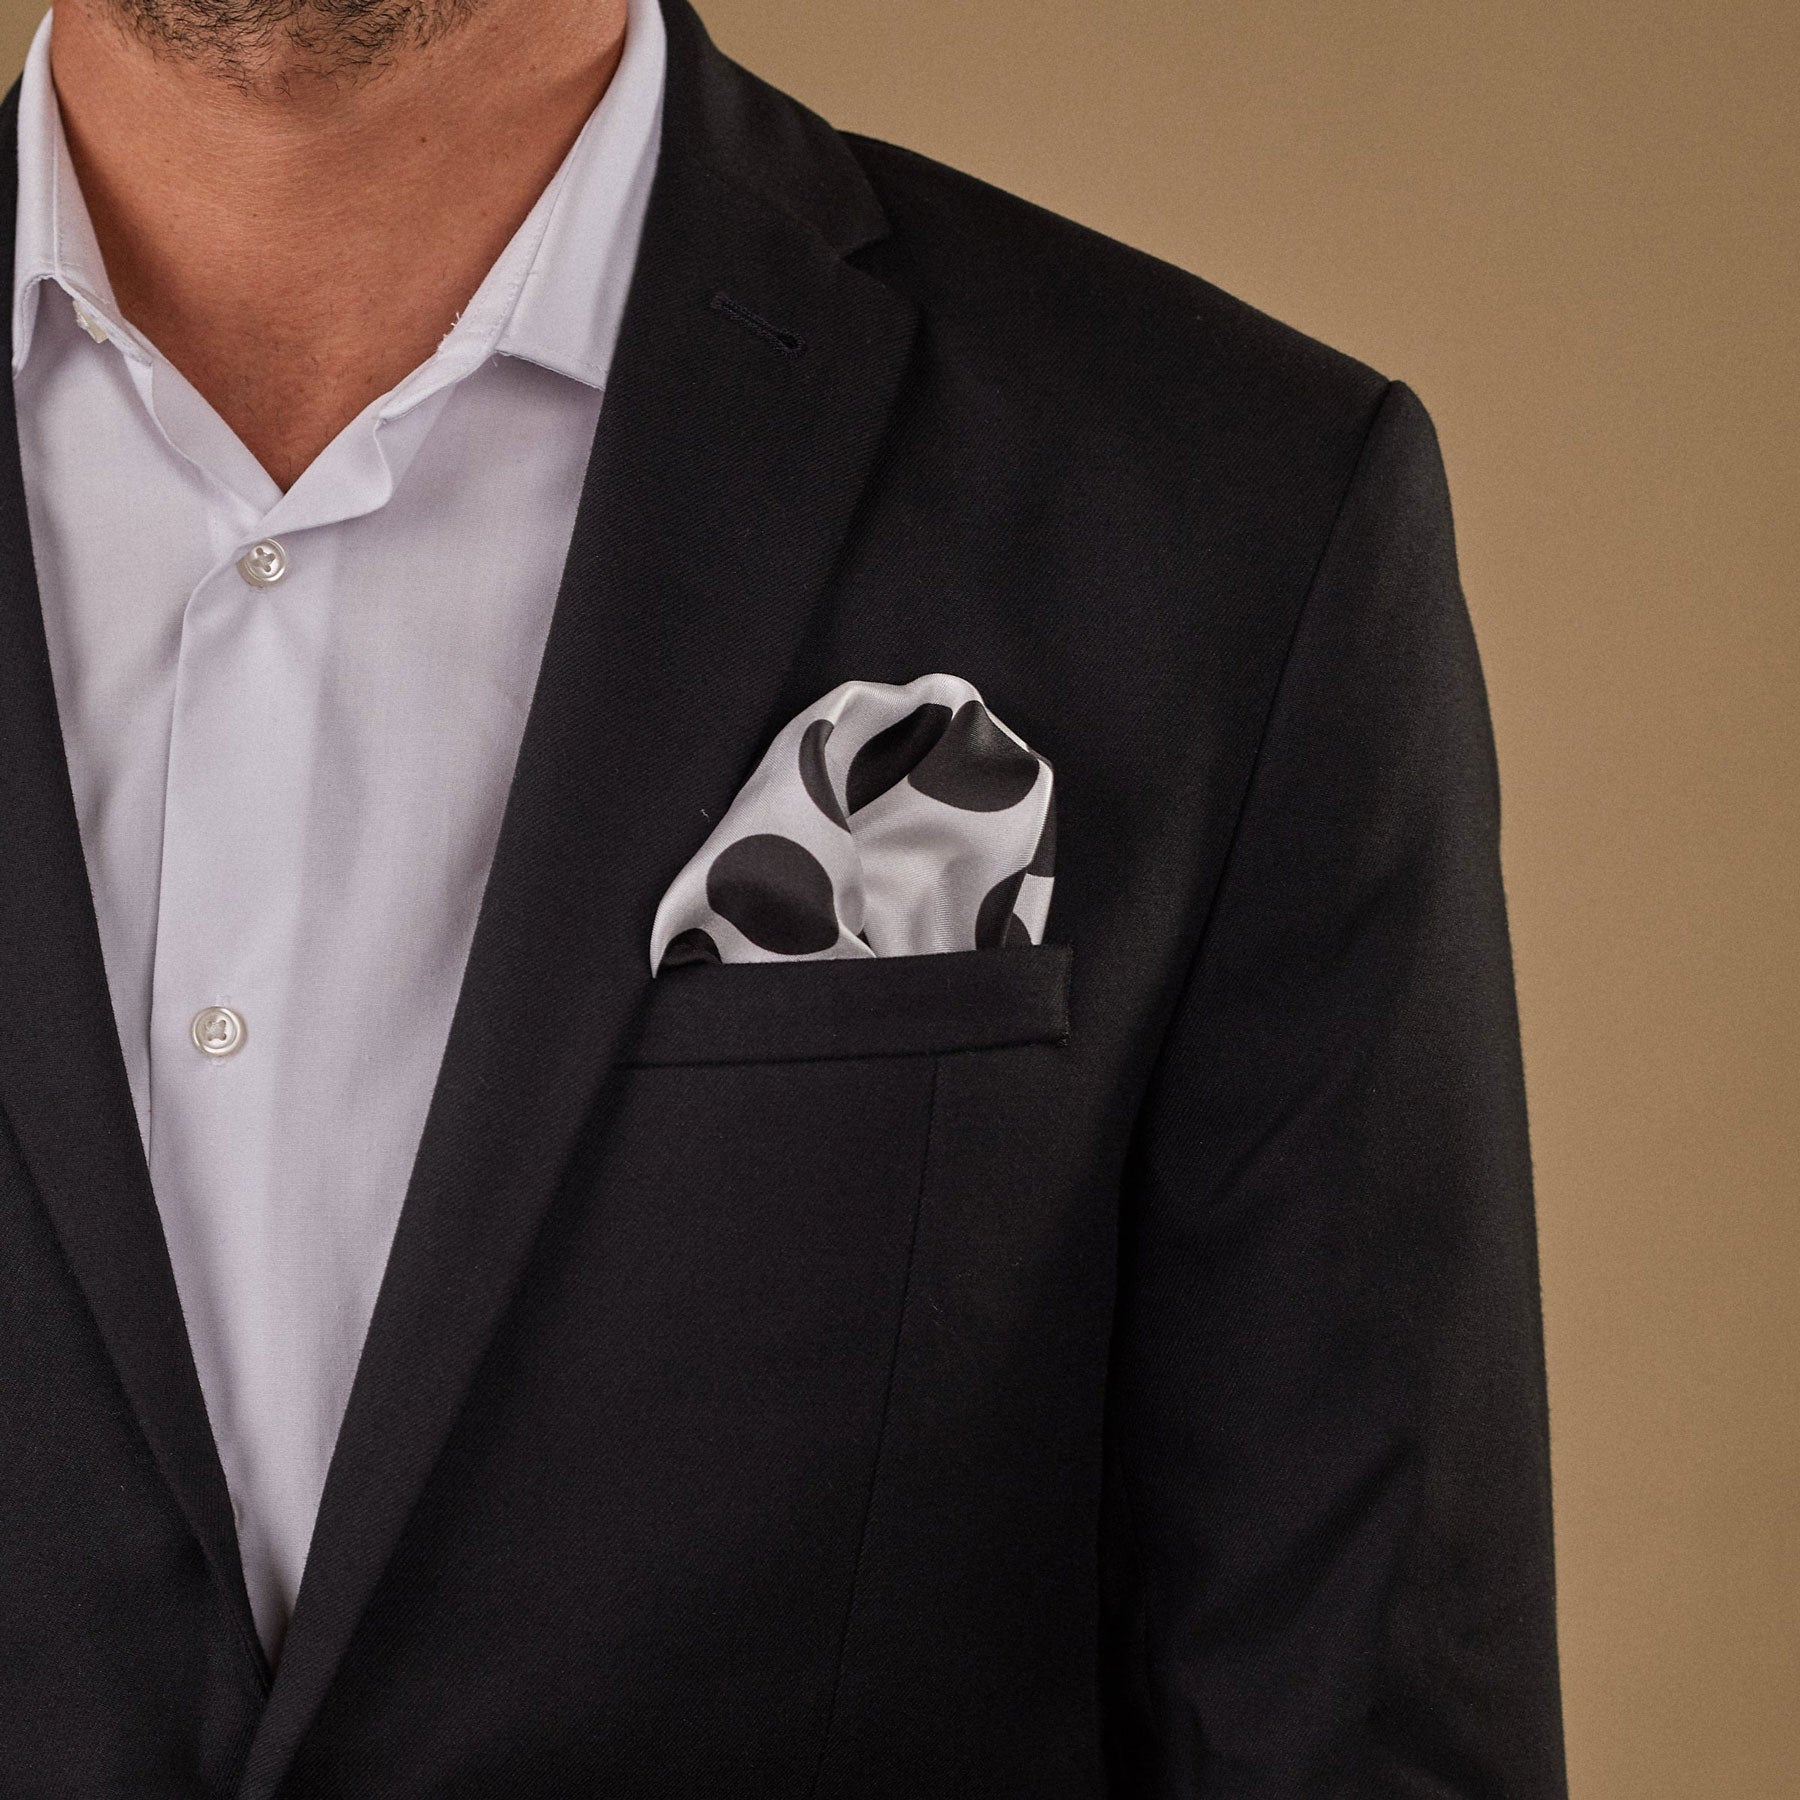 Model with black spotted 'Chaney' silk pocket square in breast pocket of dark suit jacket.